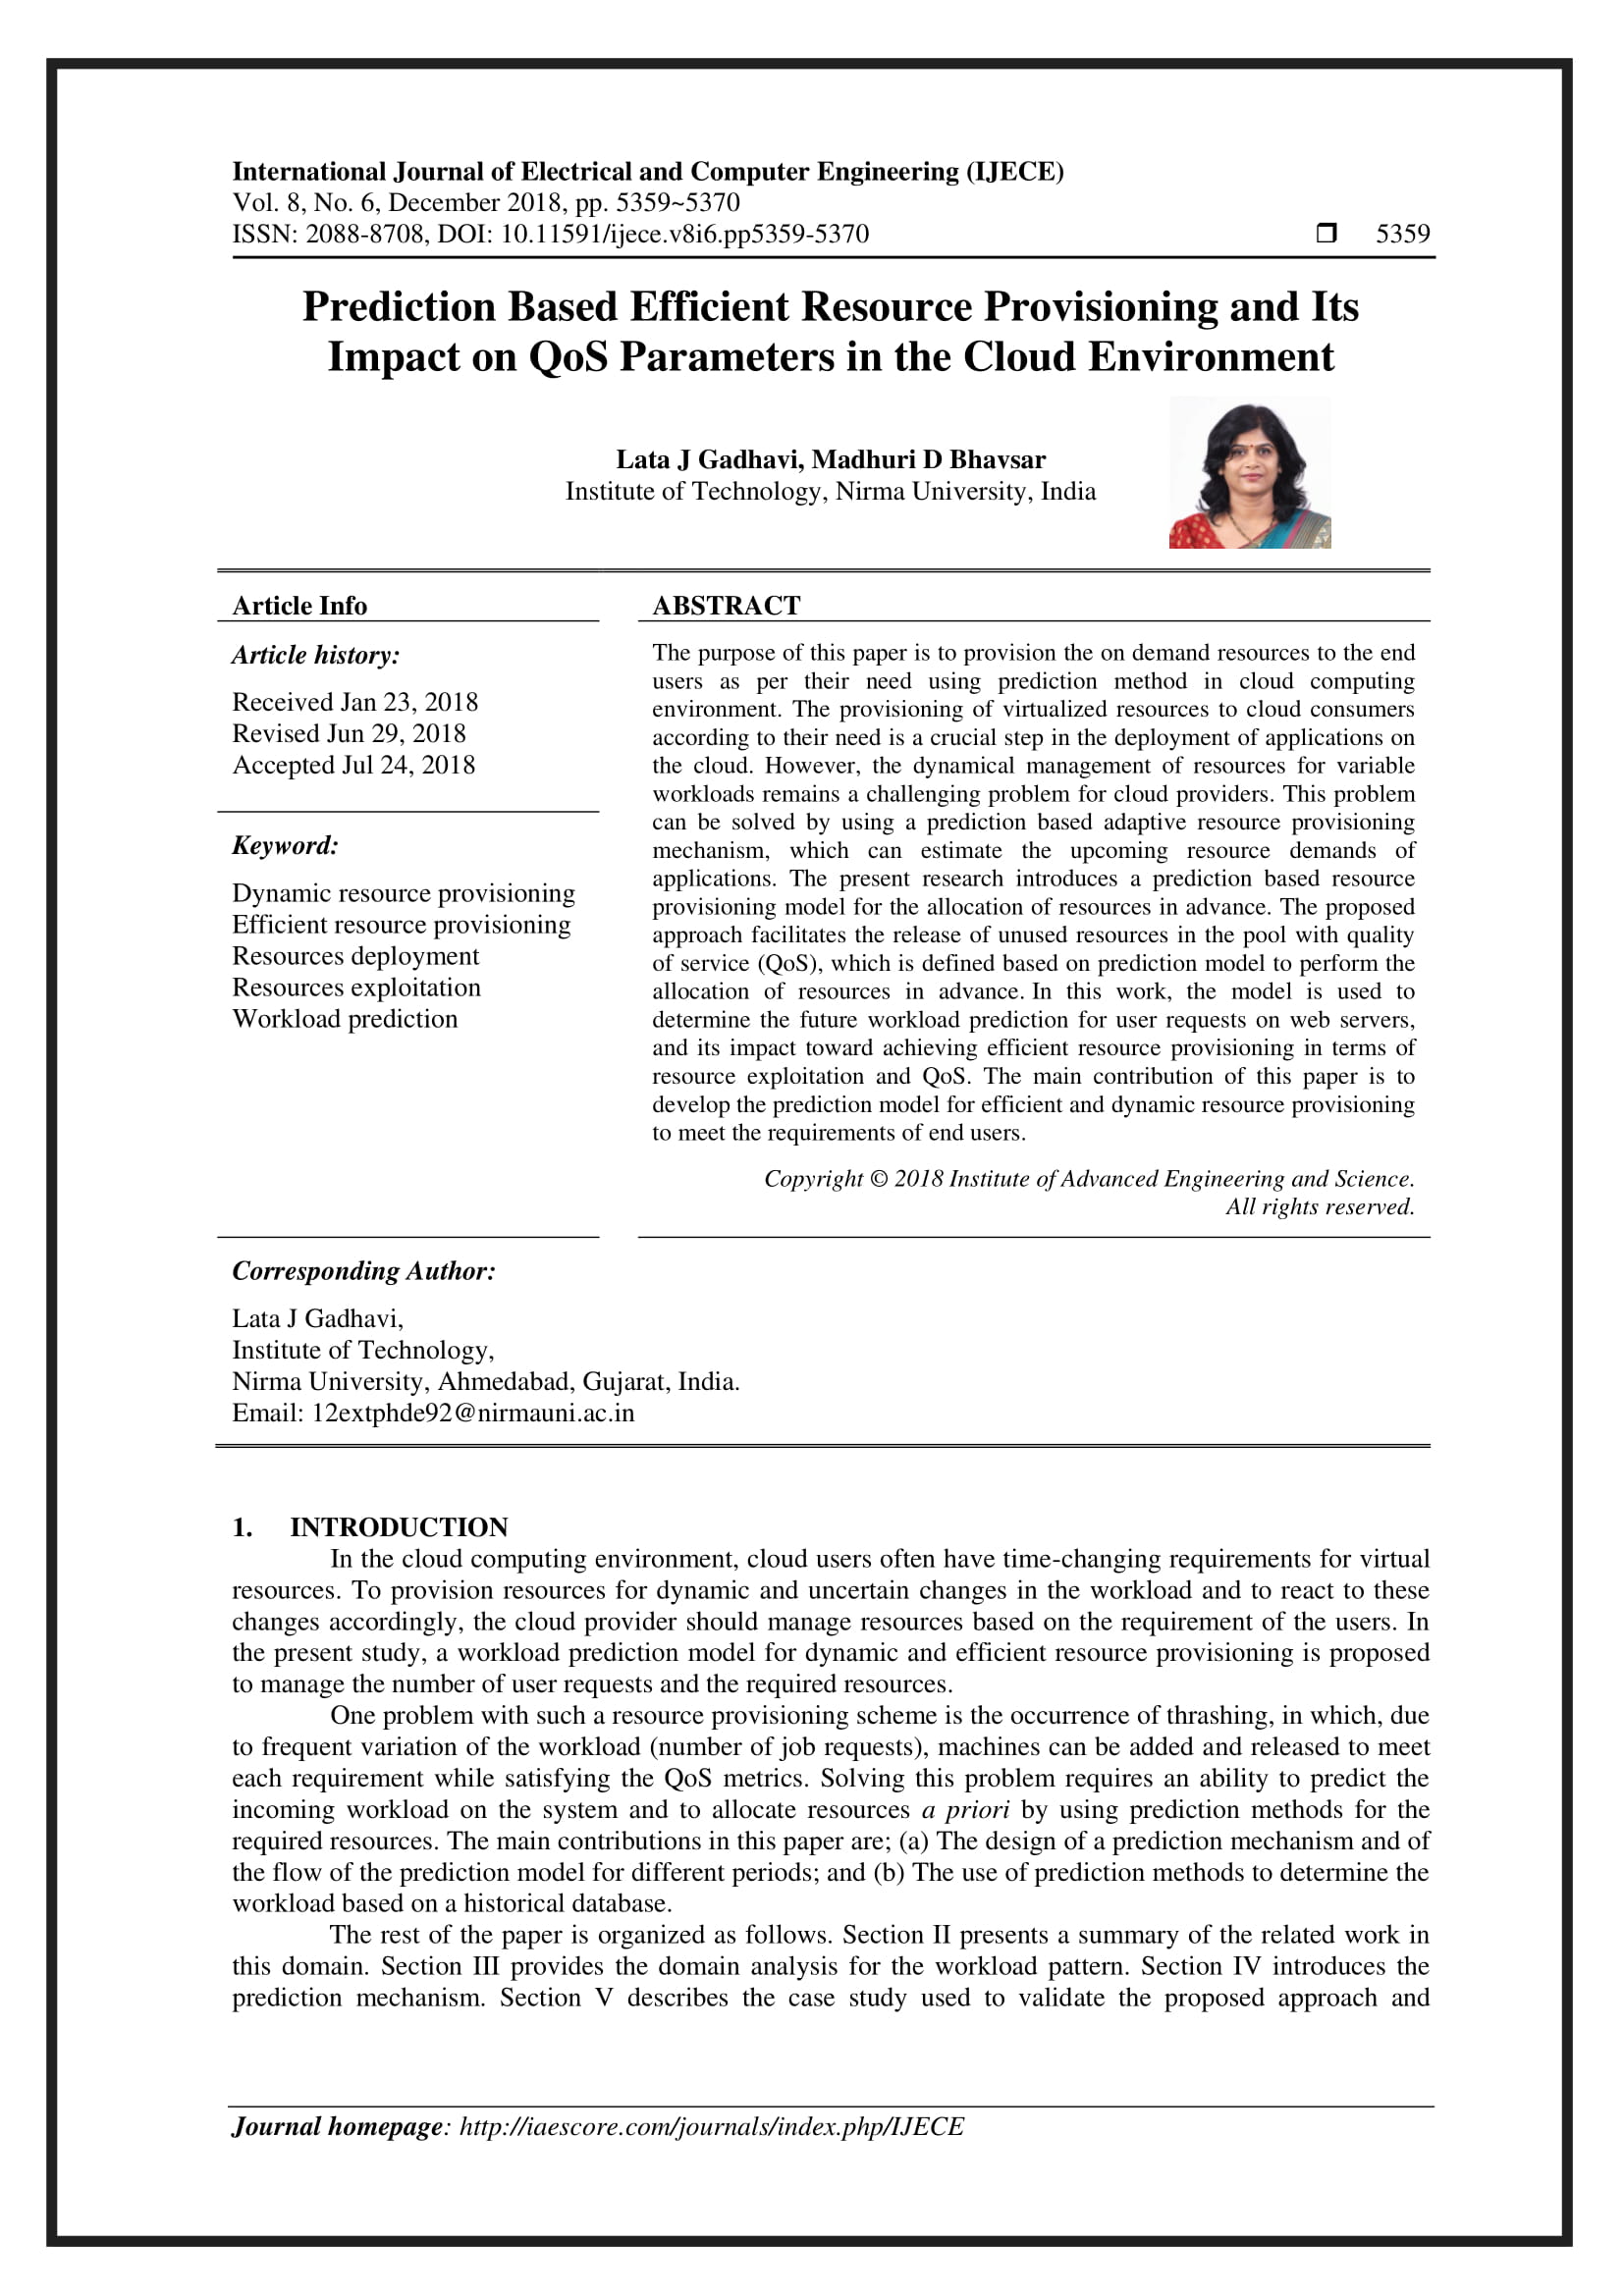 Prediction based Efficient Resource Provisioning and its Impact on QOS Parameters in the Cloud Environment